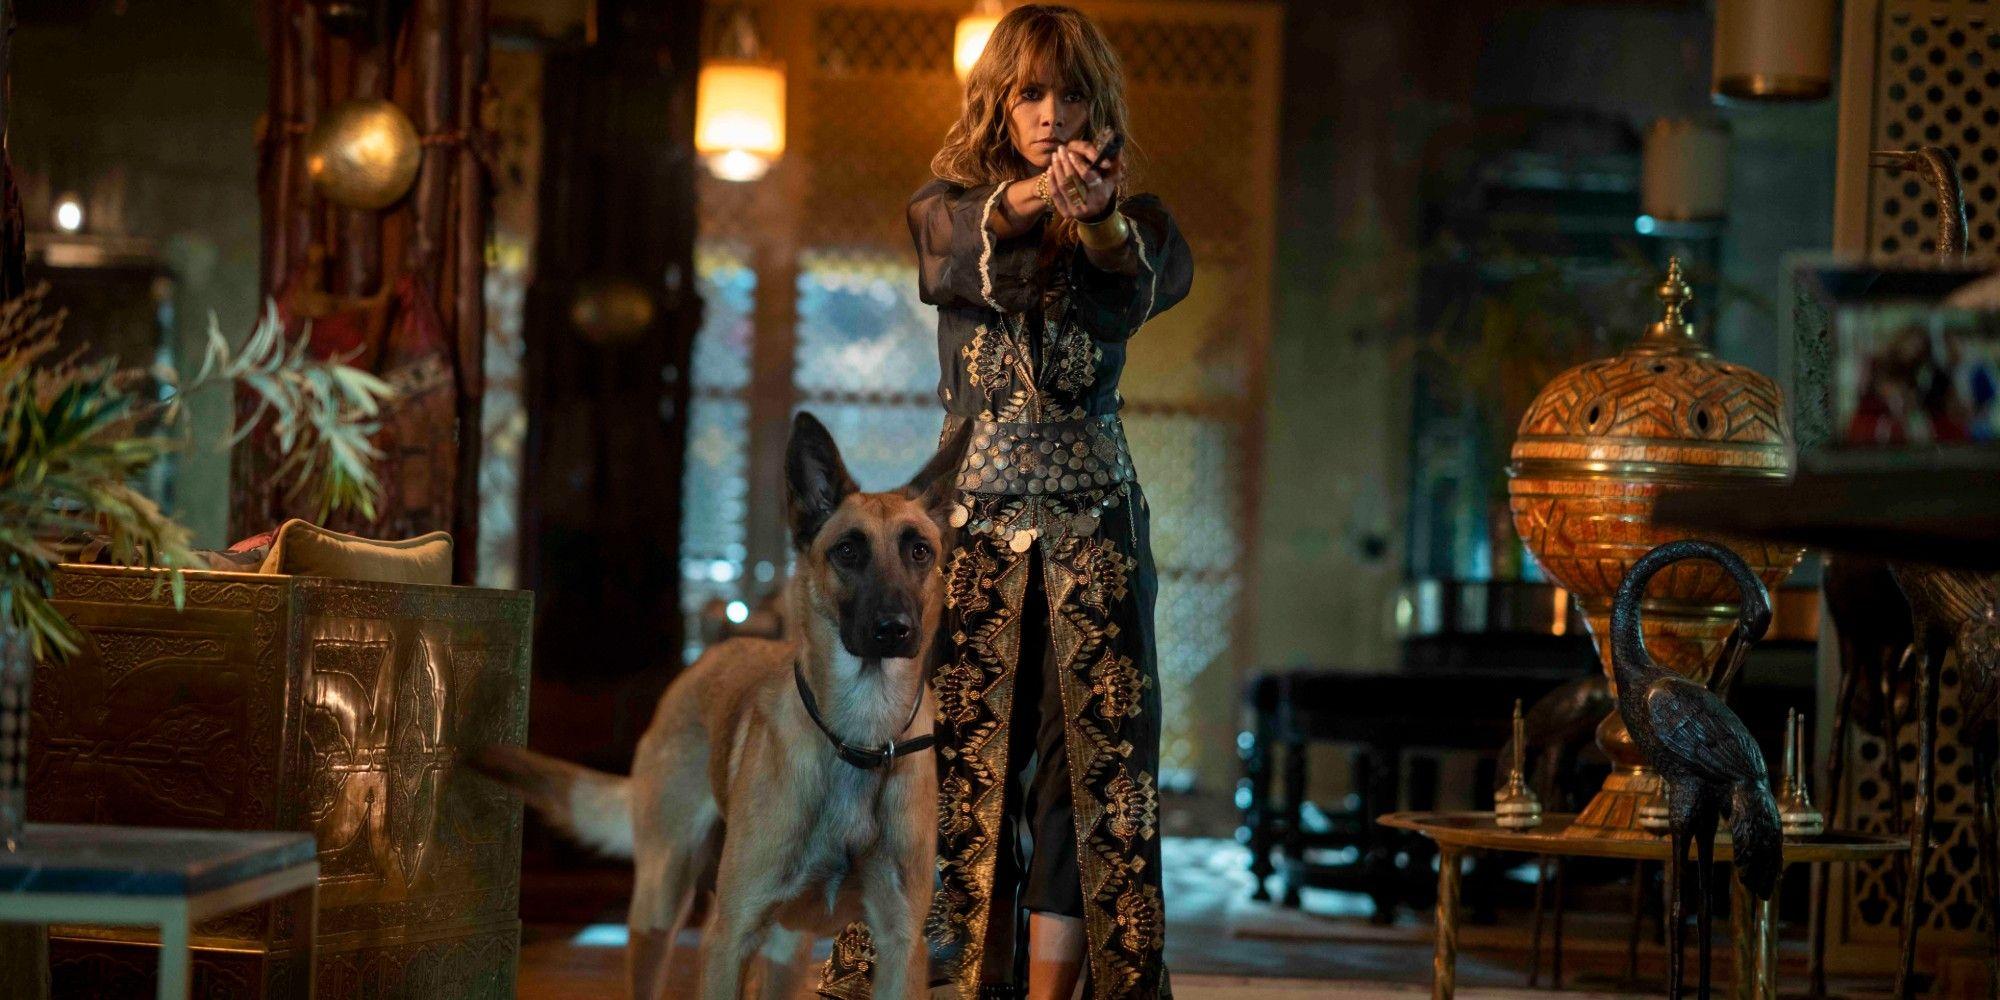 Halle Berry Porn Star - Halle Berry Working on John Wick Spin-Off | EarlyGame